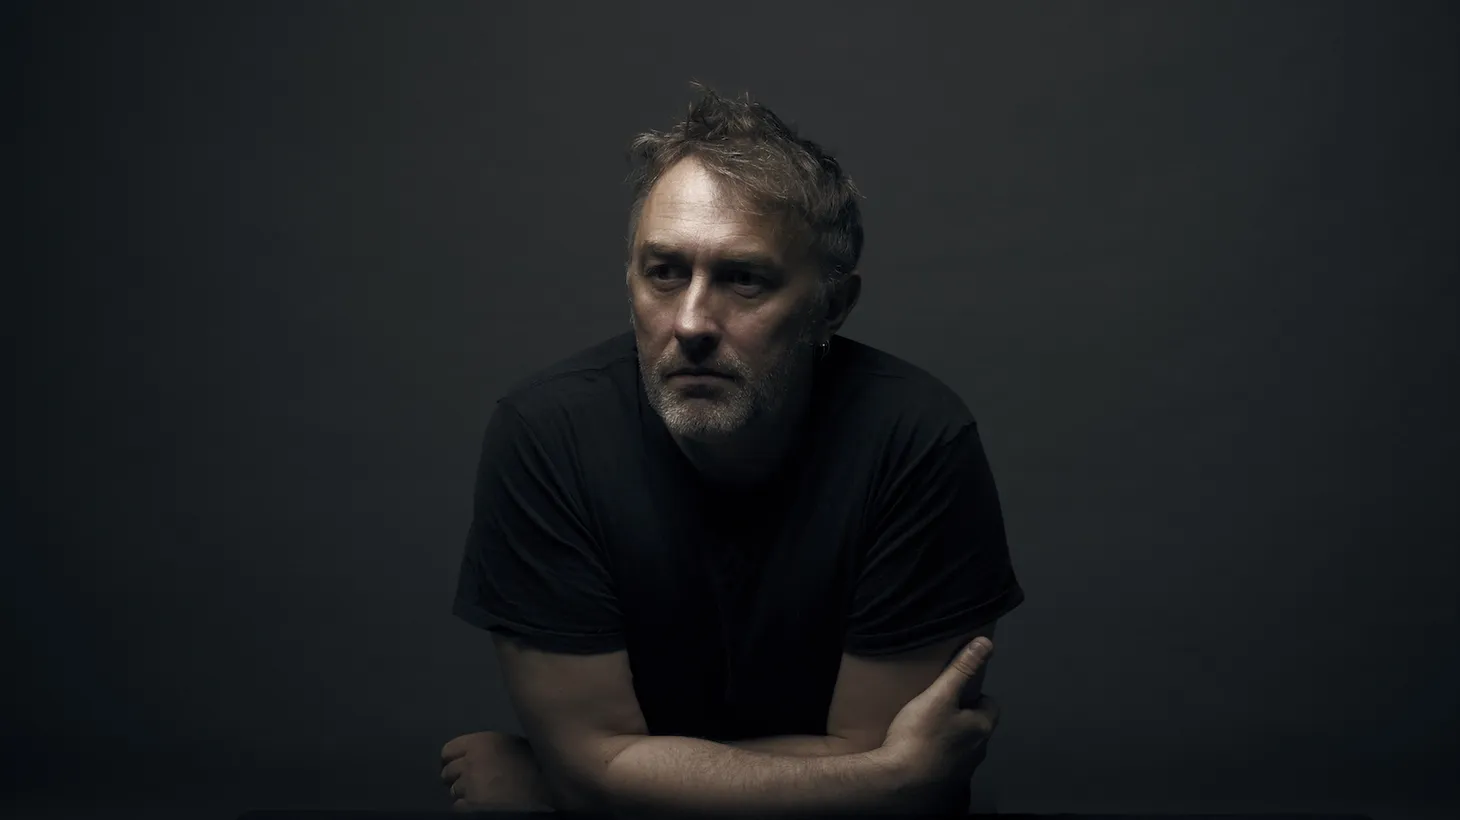 French composer and musician Yann Tiersen's new album All has him incorporating field recordings from Germany all the way to California.